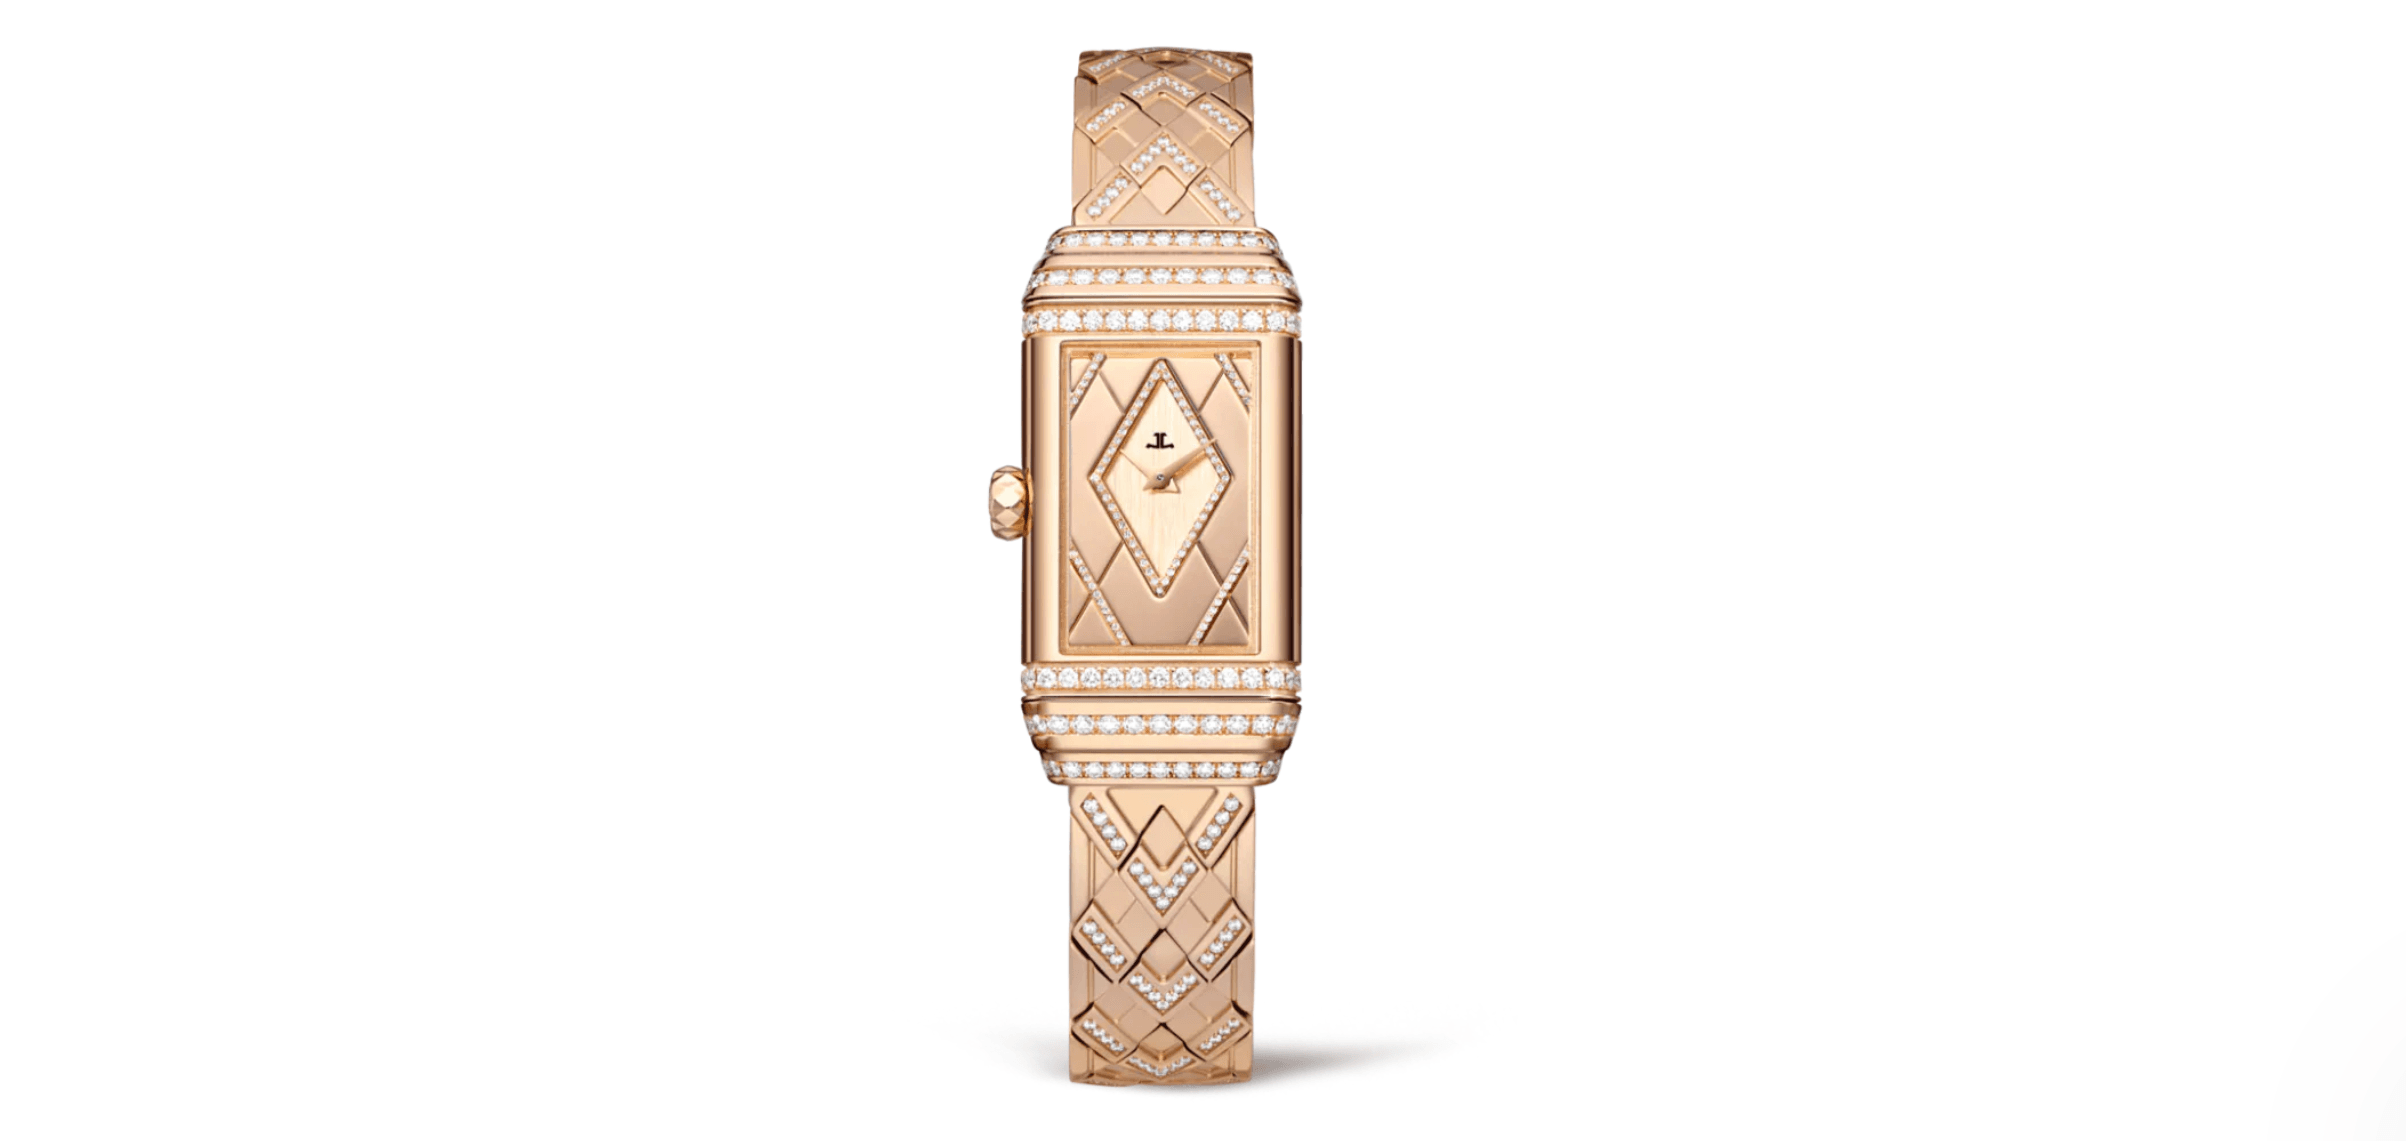 The Jaeger-LeCoultre Pink Gold Reverso One Duetto Jewellery